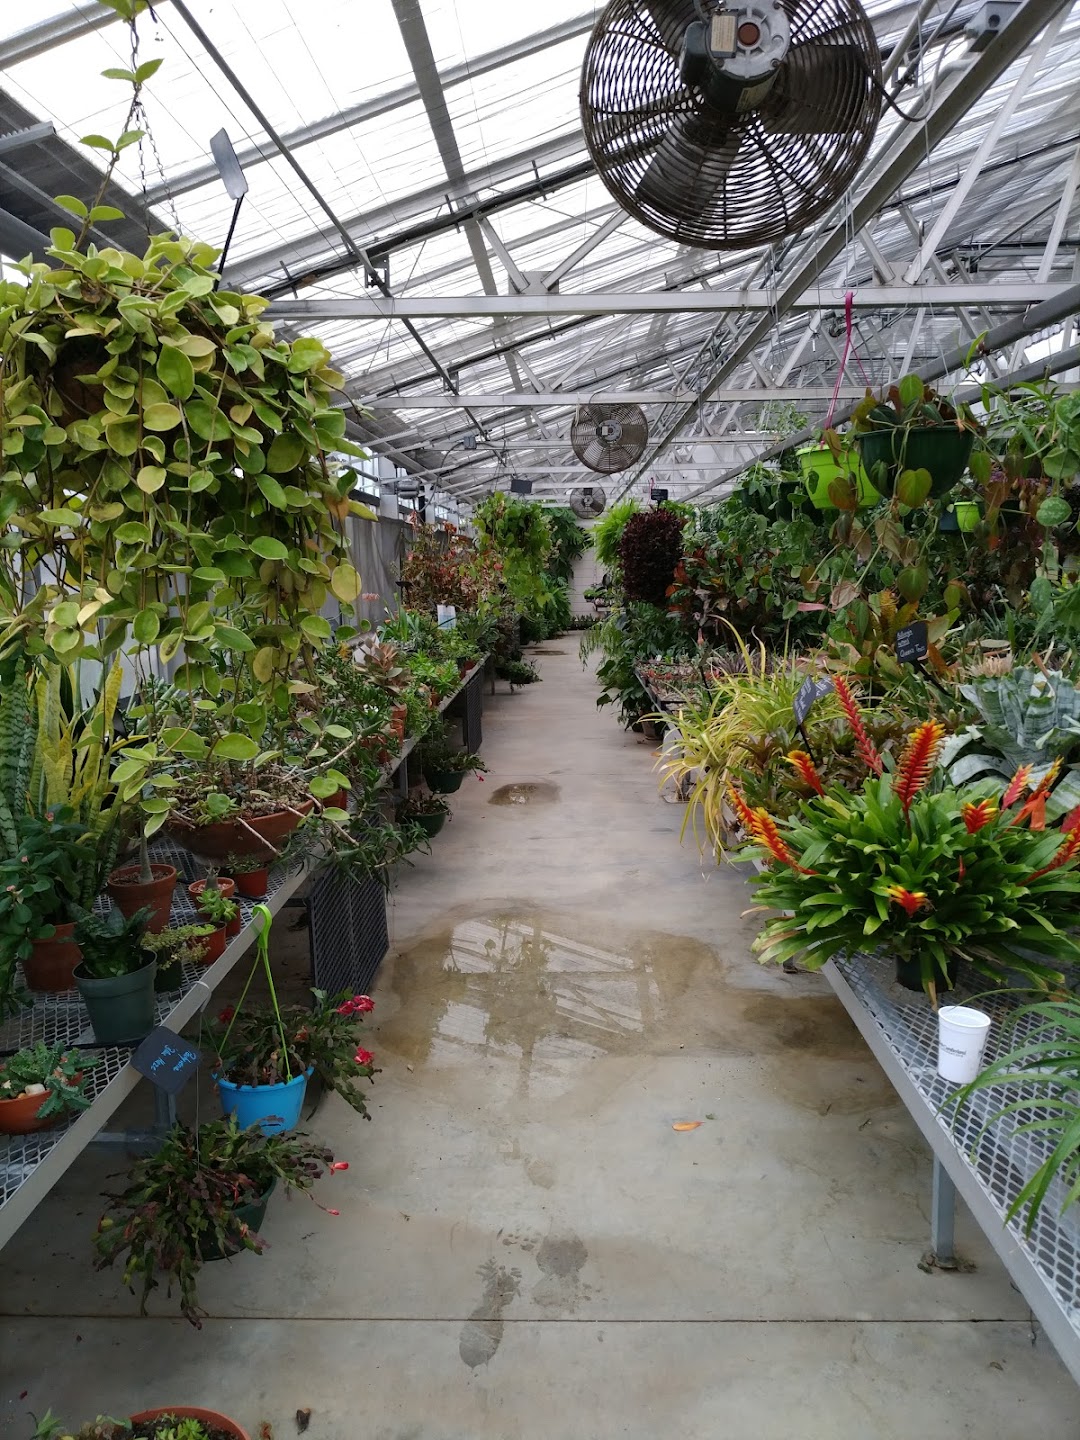 Fayetteville Technical Community College Horticulture Center